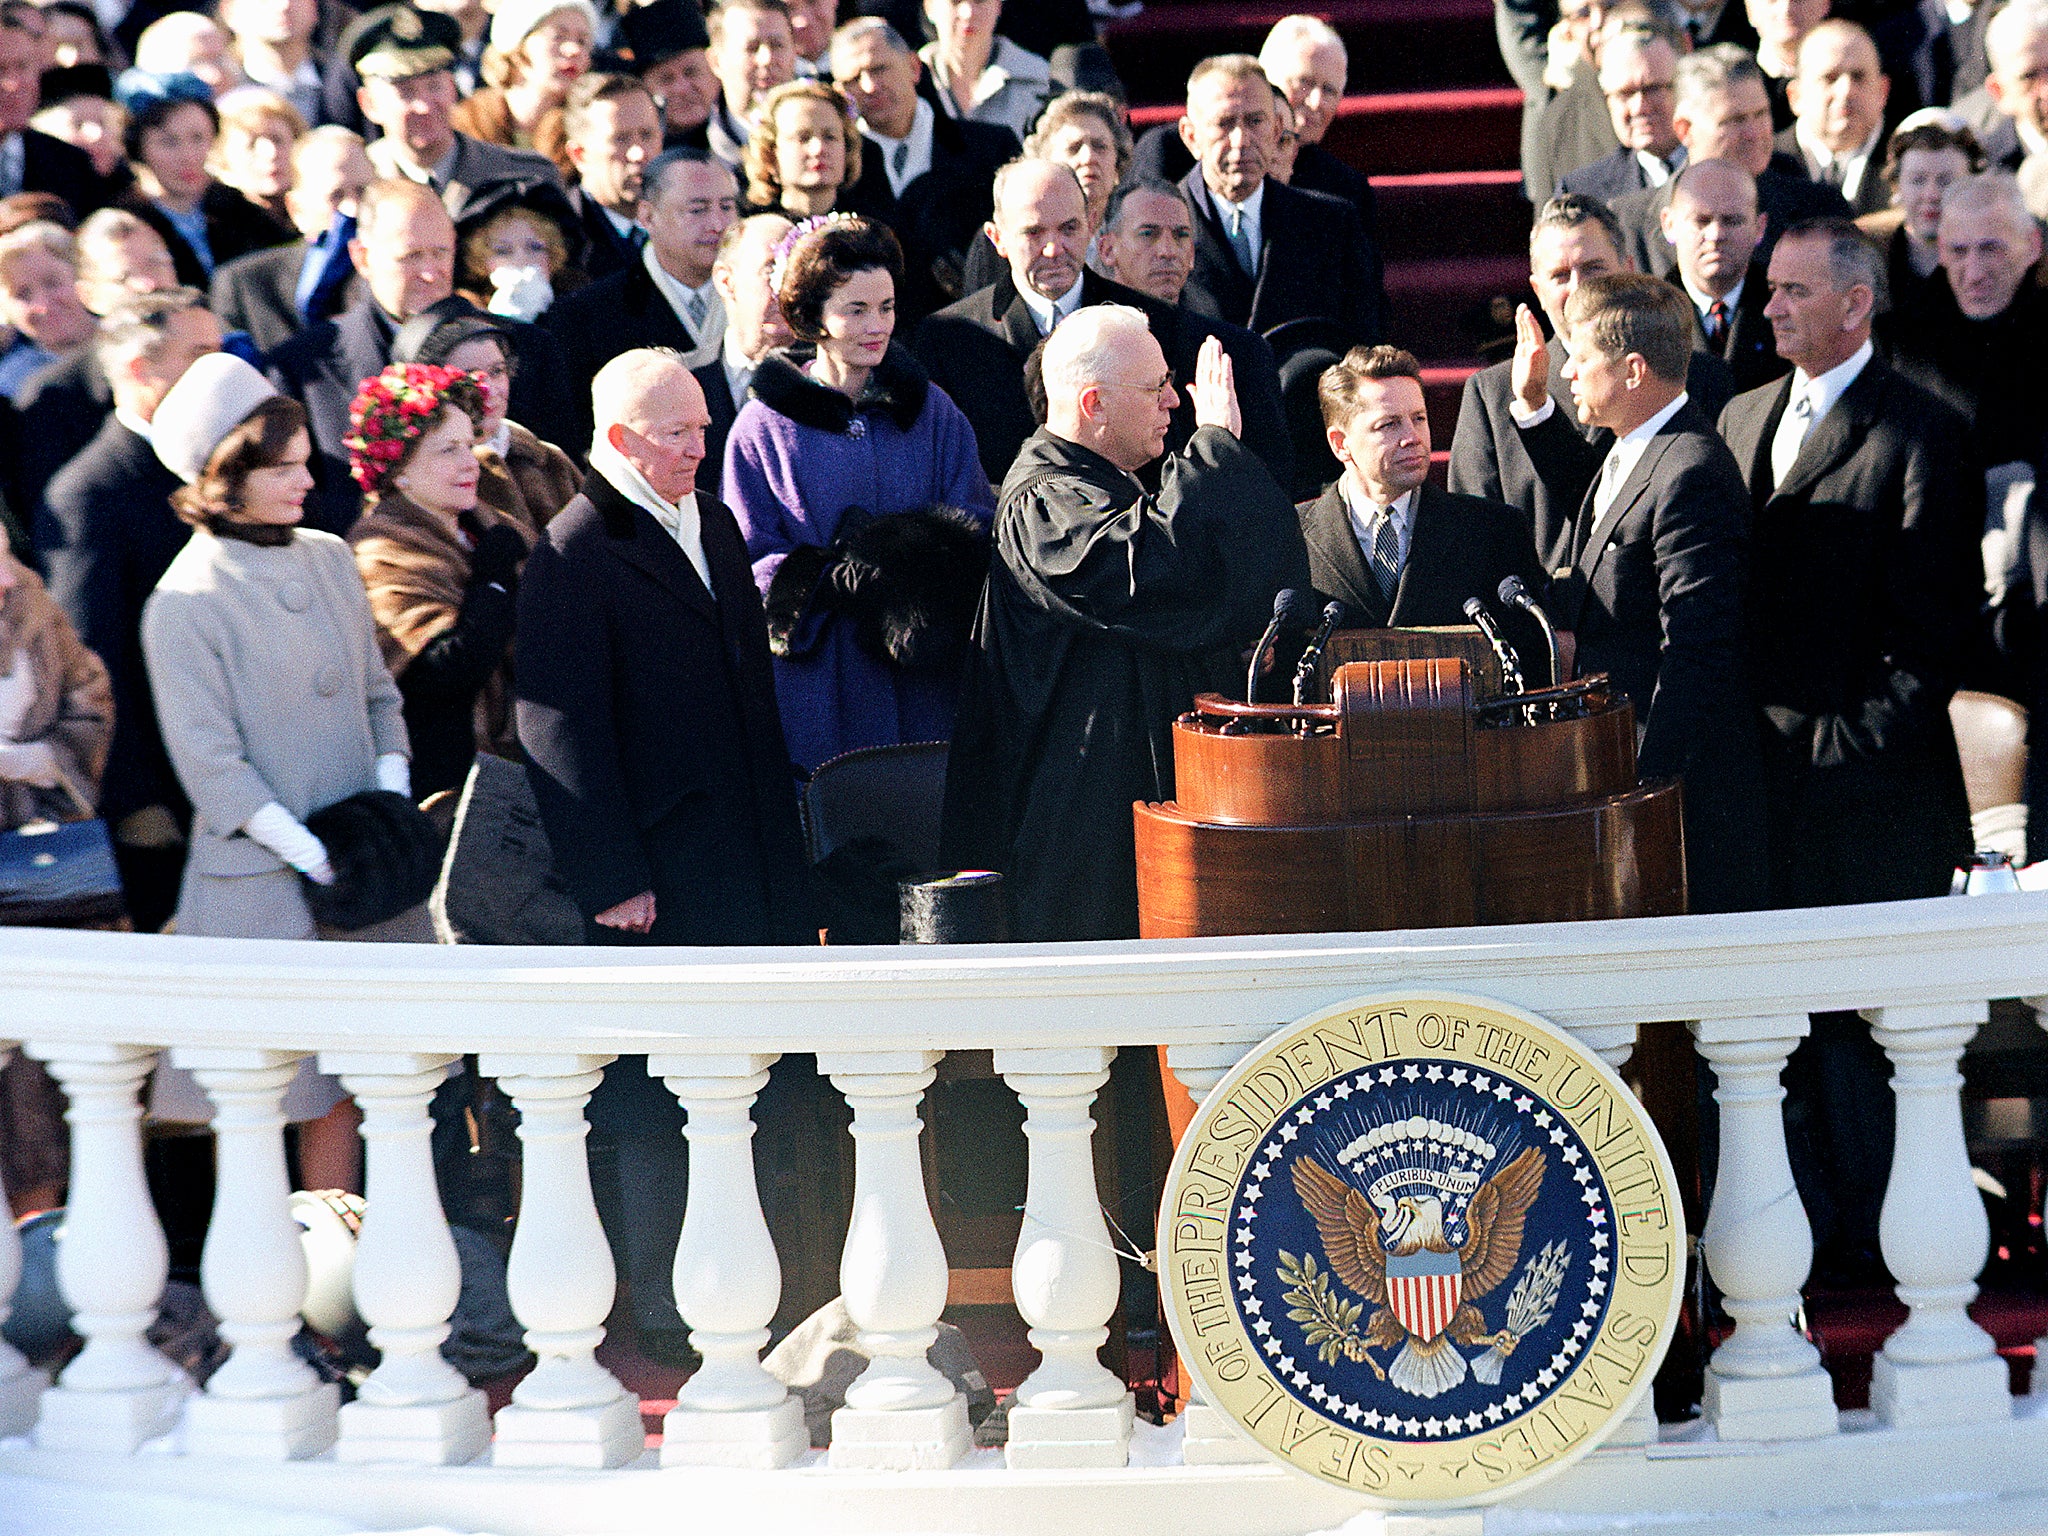 John F Kennedy made a memorable speech at his inauguration in 1961 (Getty/Bettmann Archive)